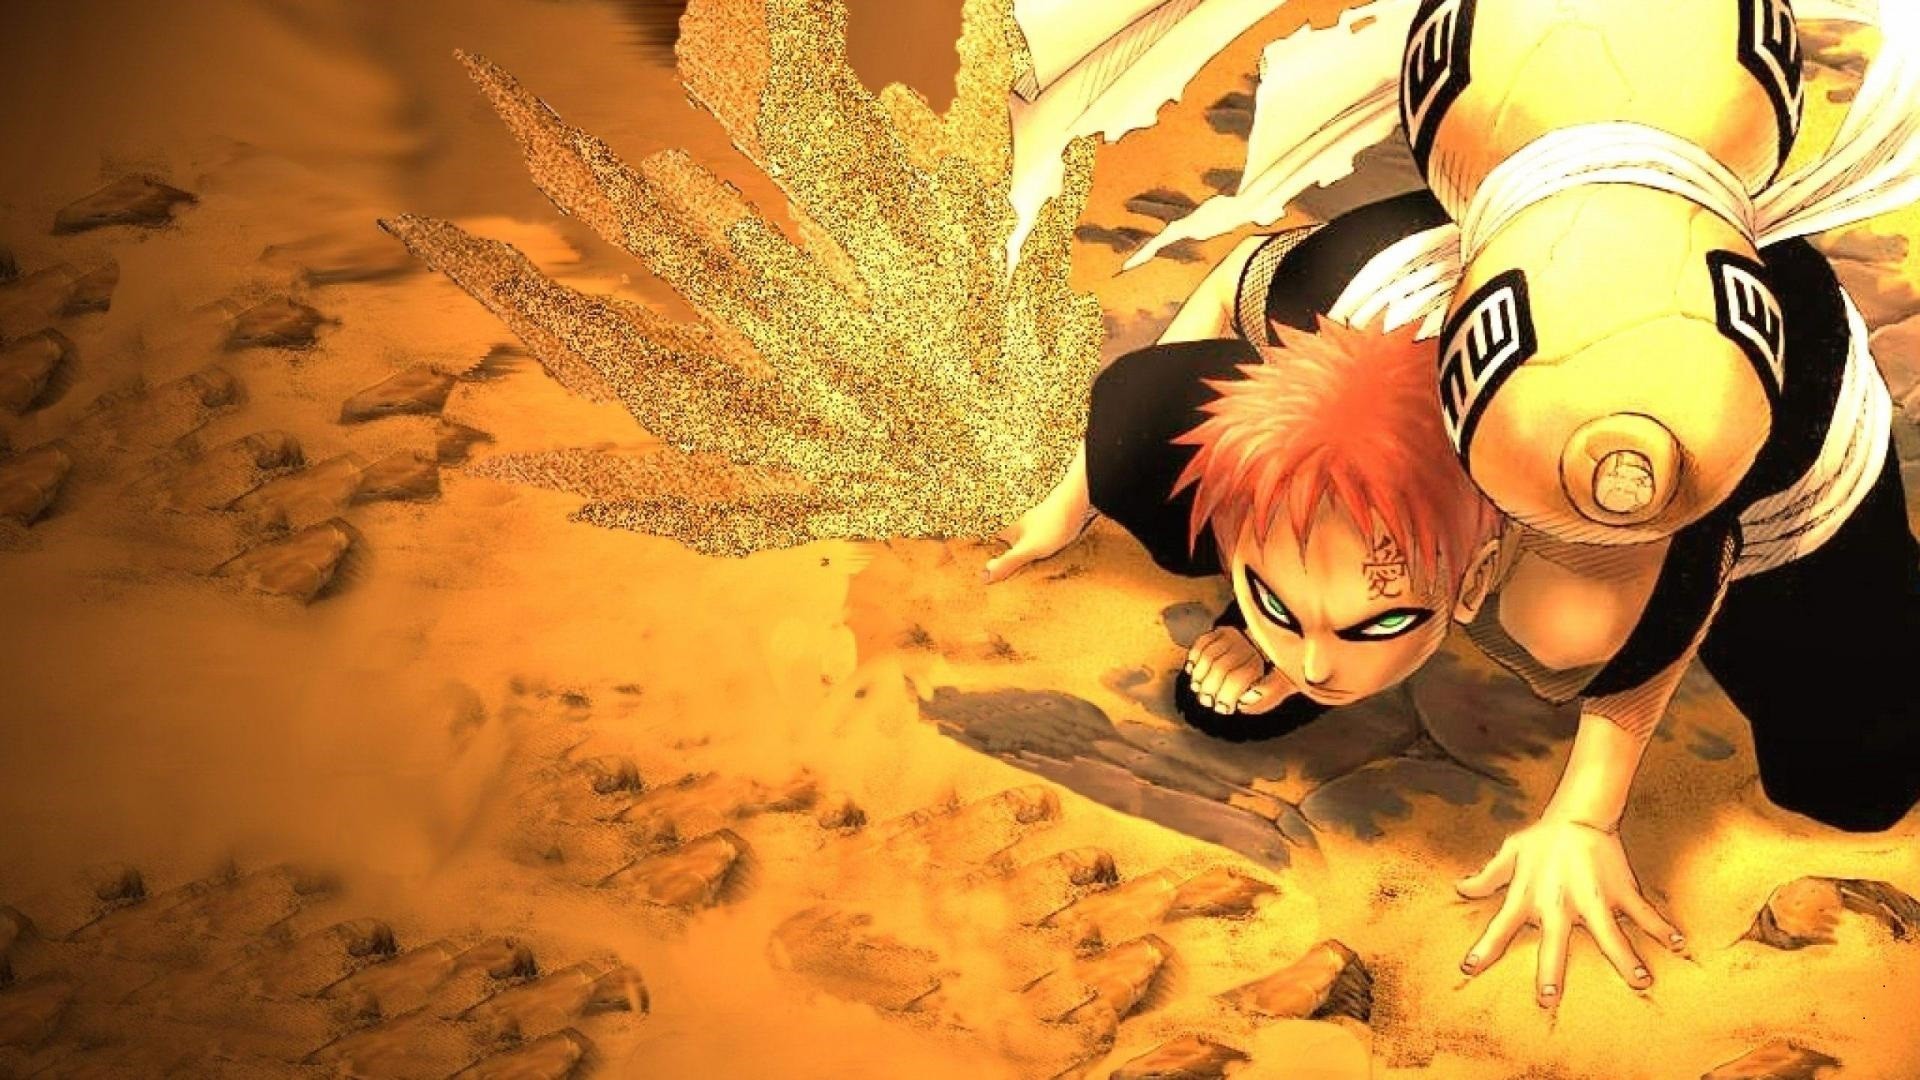 Download Gaara of the Sand showing off the power of his chakra. Wallpaper |  Wallpapers.com